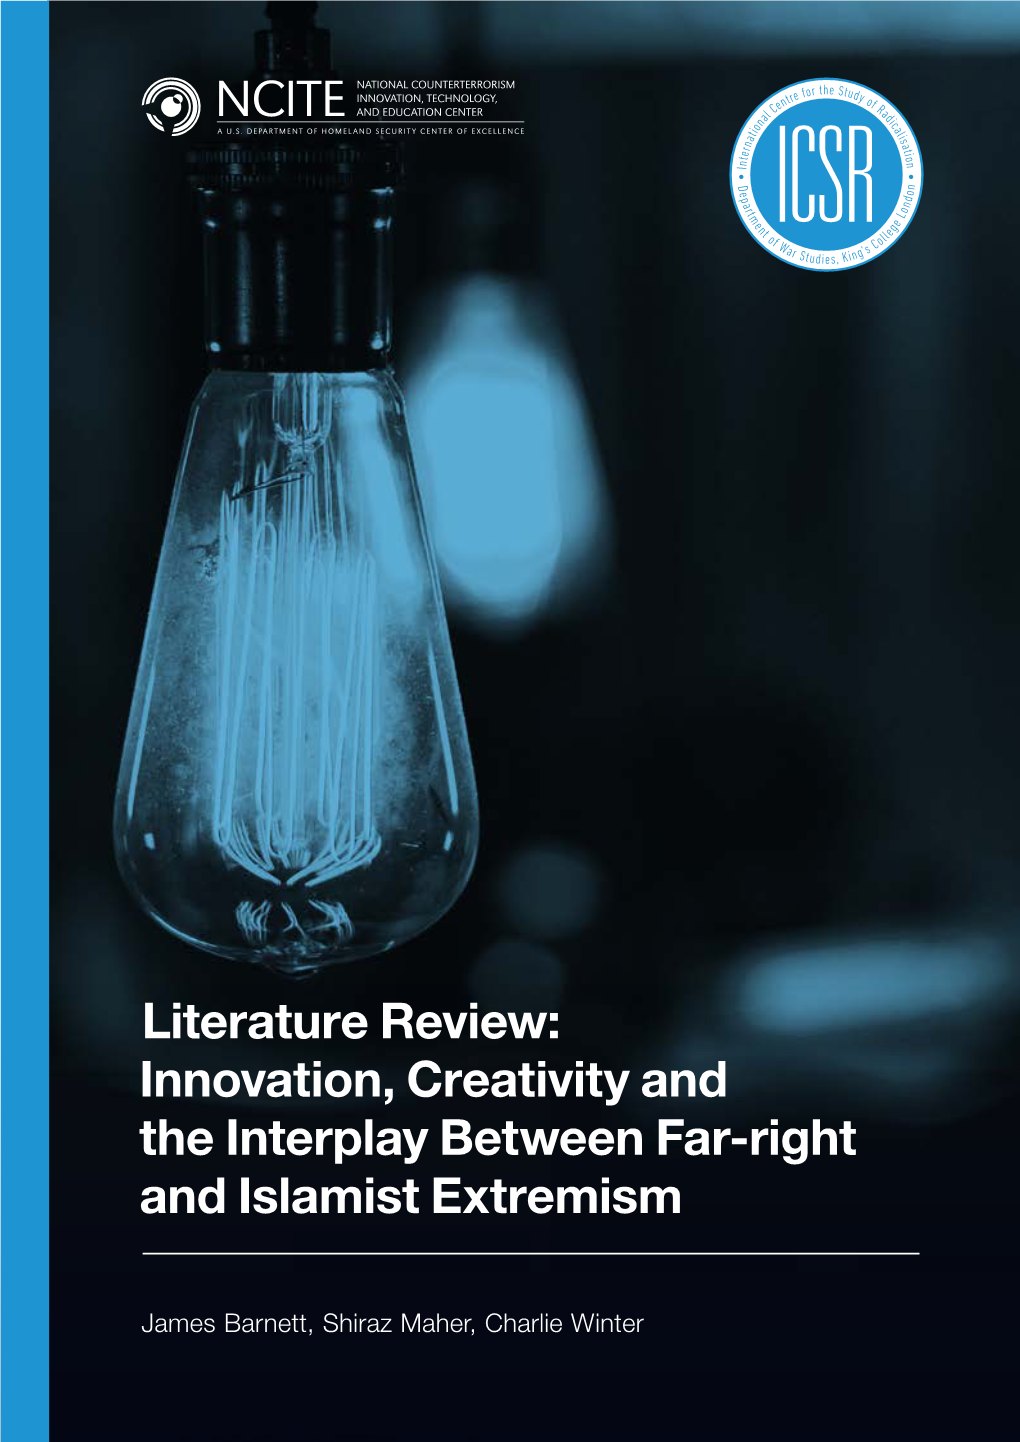 Literature Review: Innovation, Creativity and the Interplay Between Far‑Right and Islamist Extremism